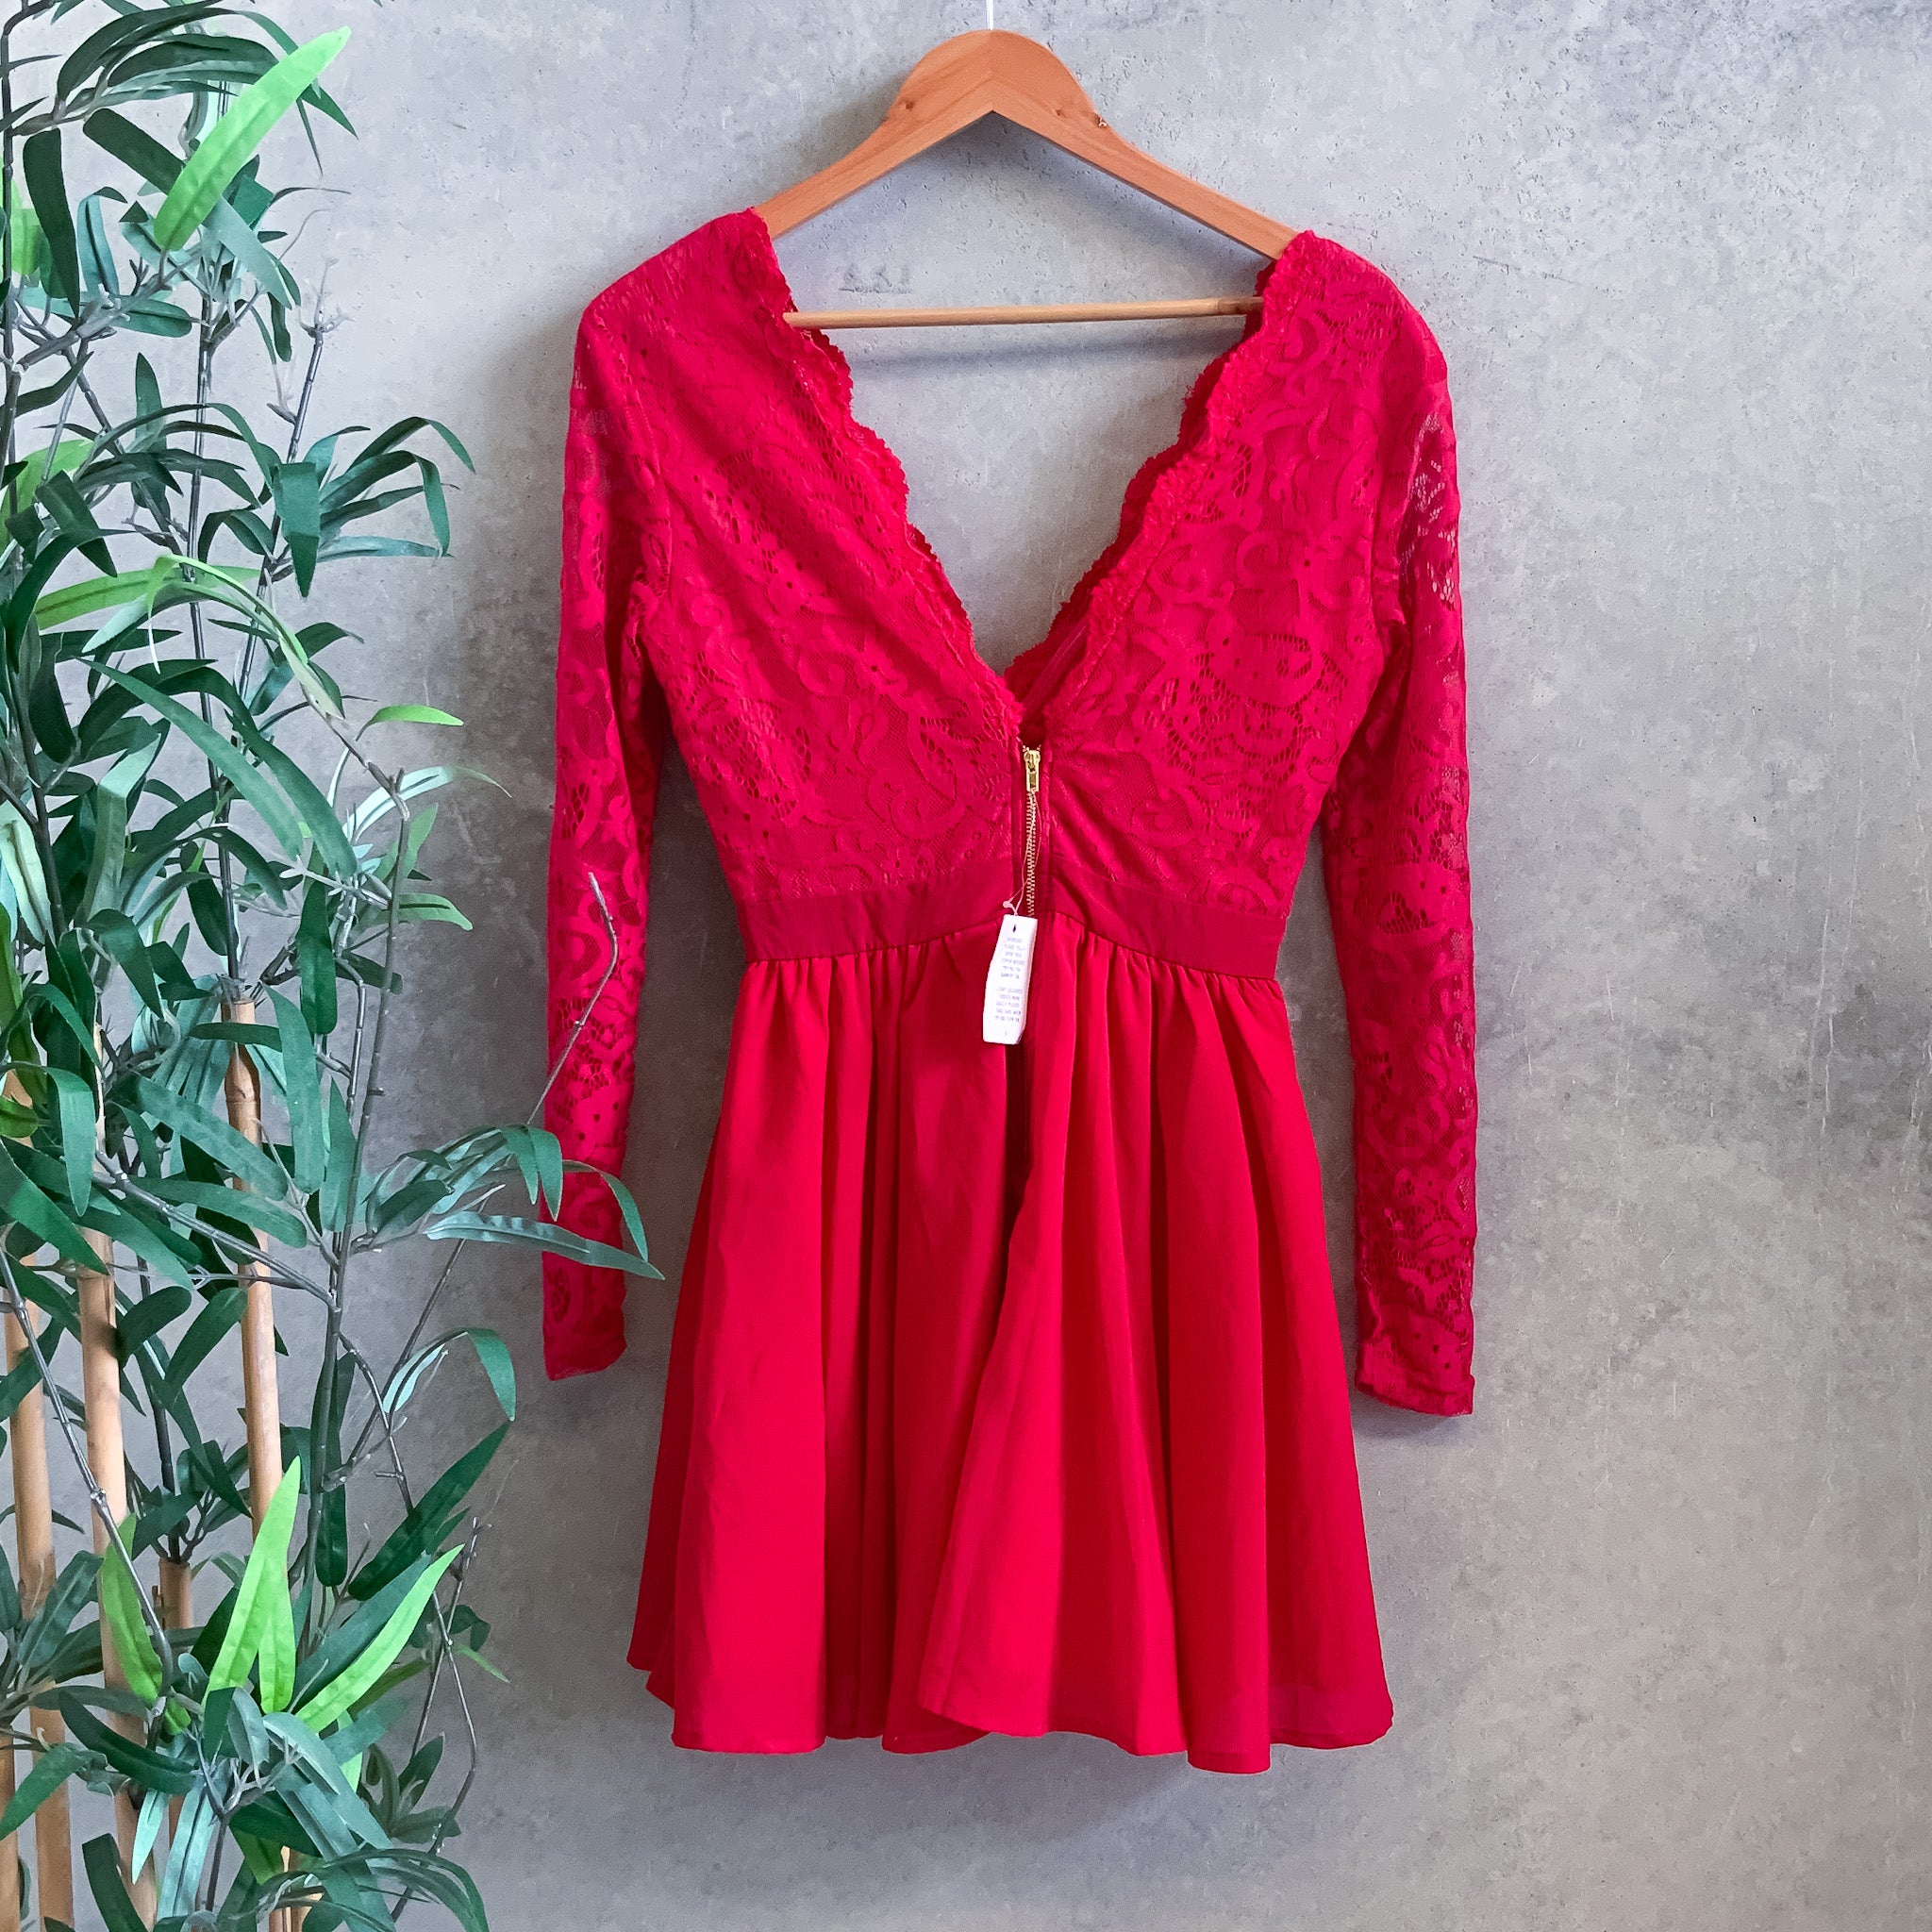 BNWT MISSGUIDED Long Sleeve Red Lace Plunge Skater/Party Dress - Size 8